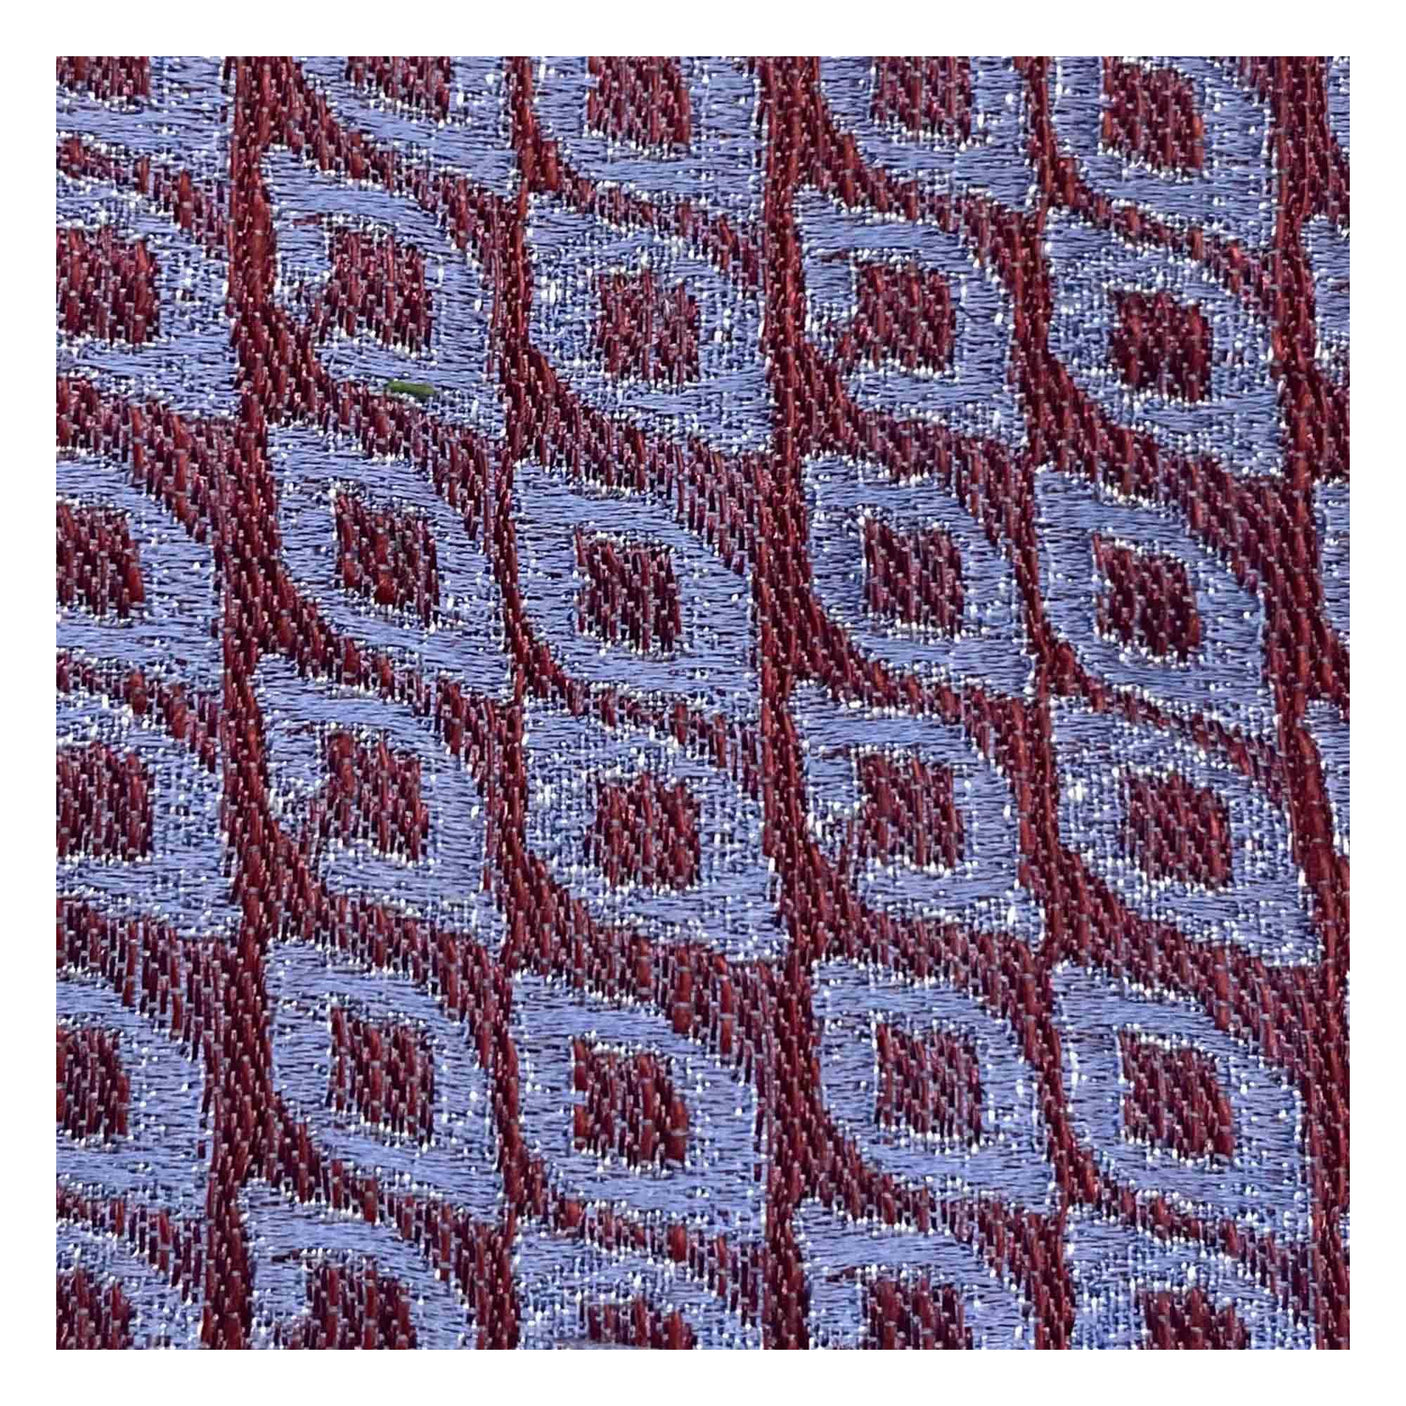 Tie with burgundy and sky blue oval pattern